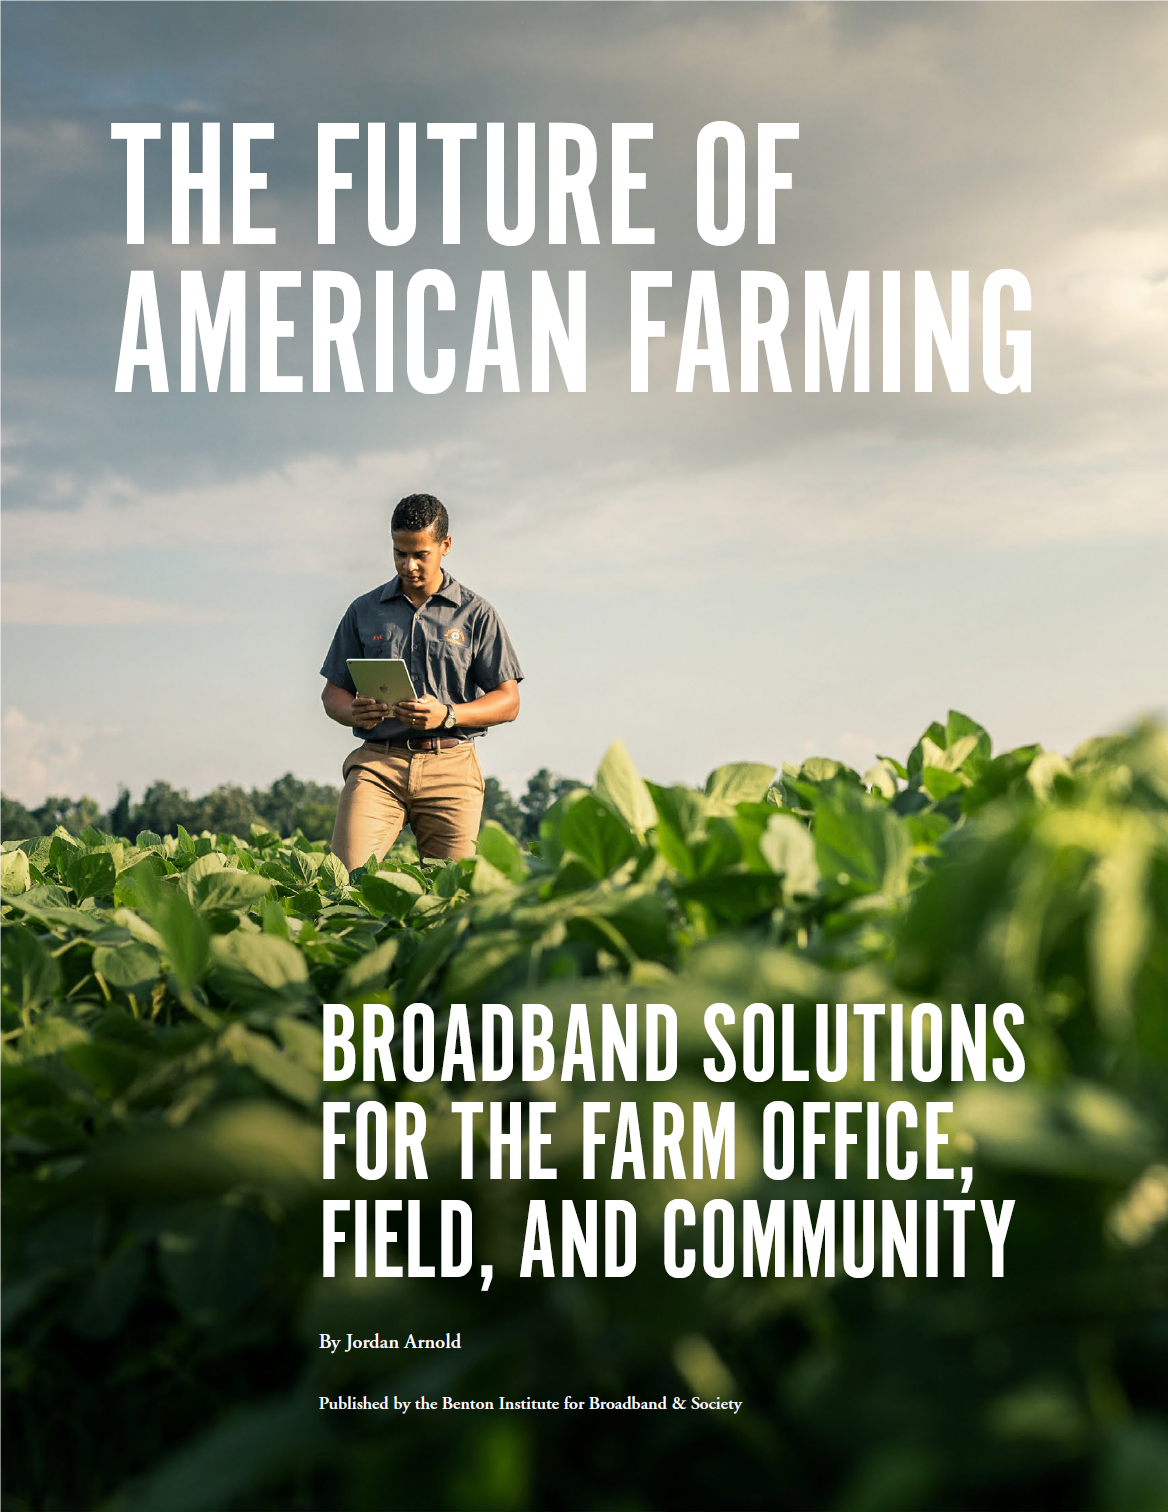 The Future of American Farming: Broadband Solutions for the Farm Office, Field, and Community